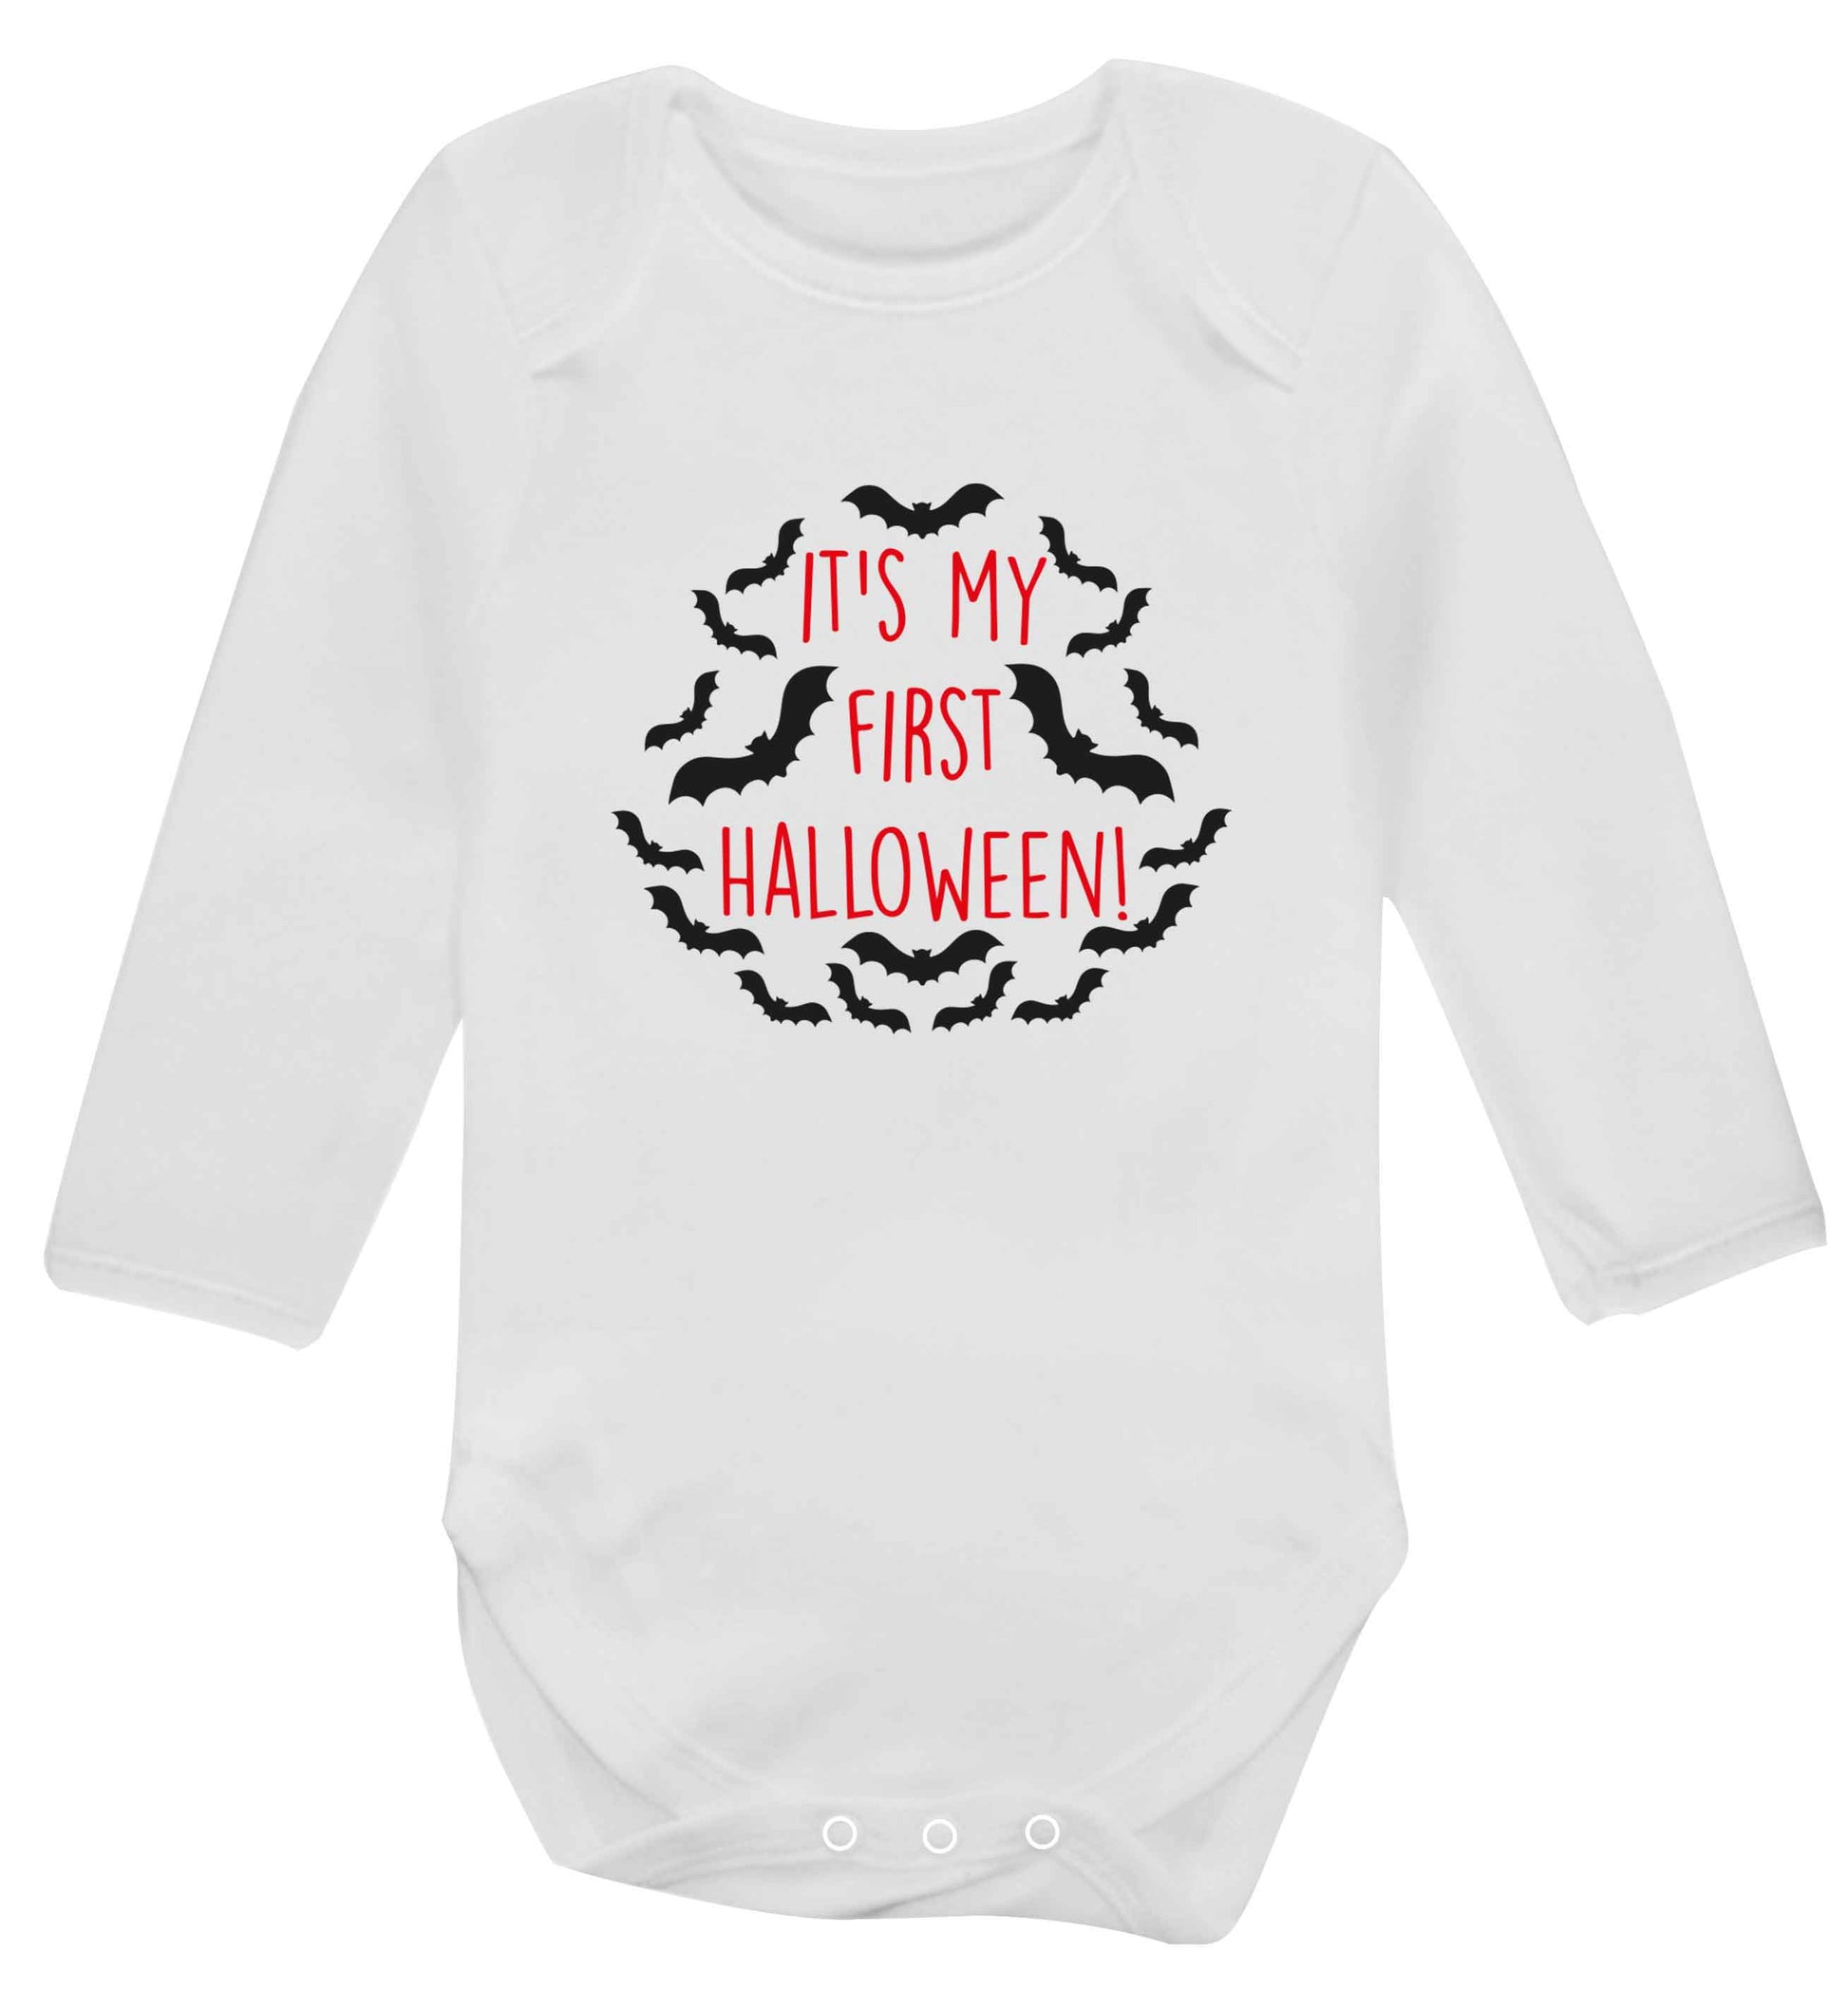 It's my first halloween - bat border baby vest long sleeved white 6-12 months